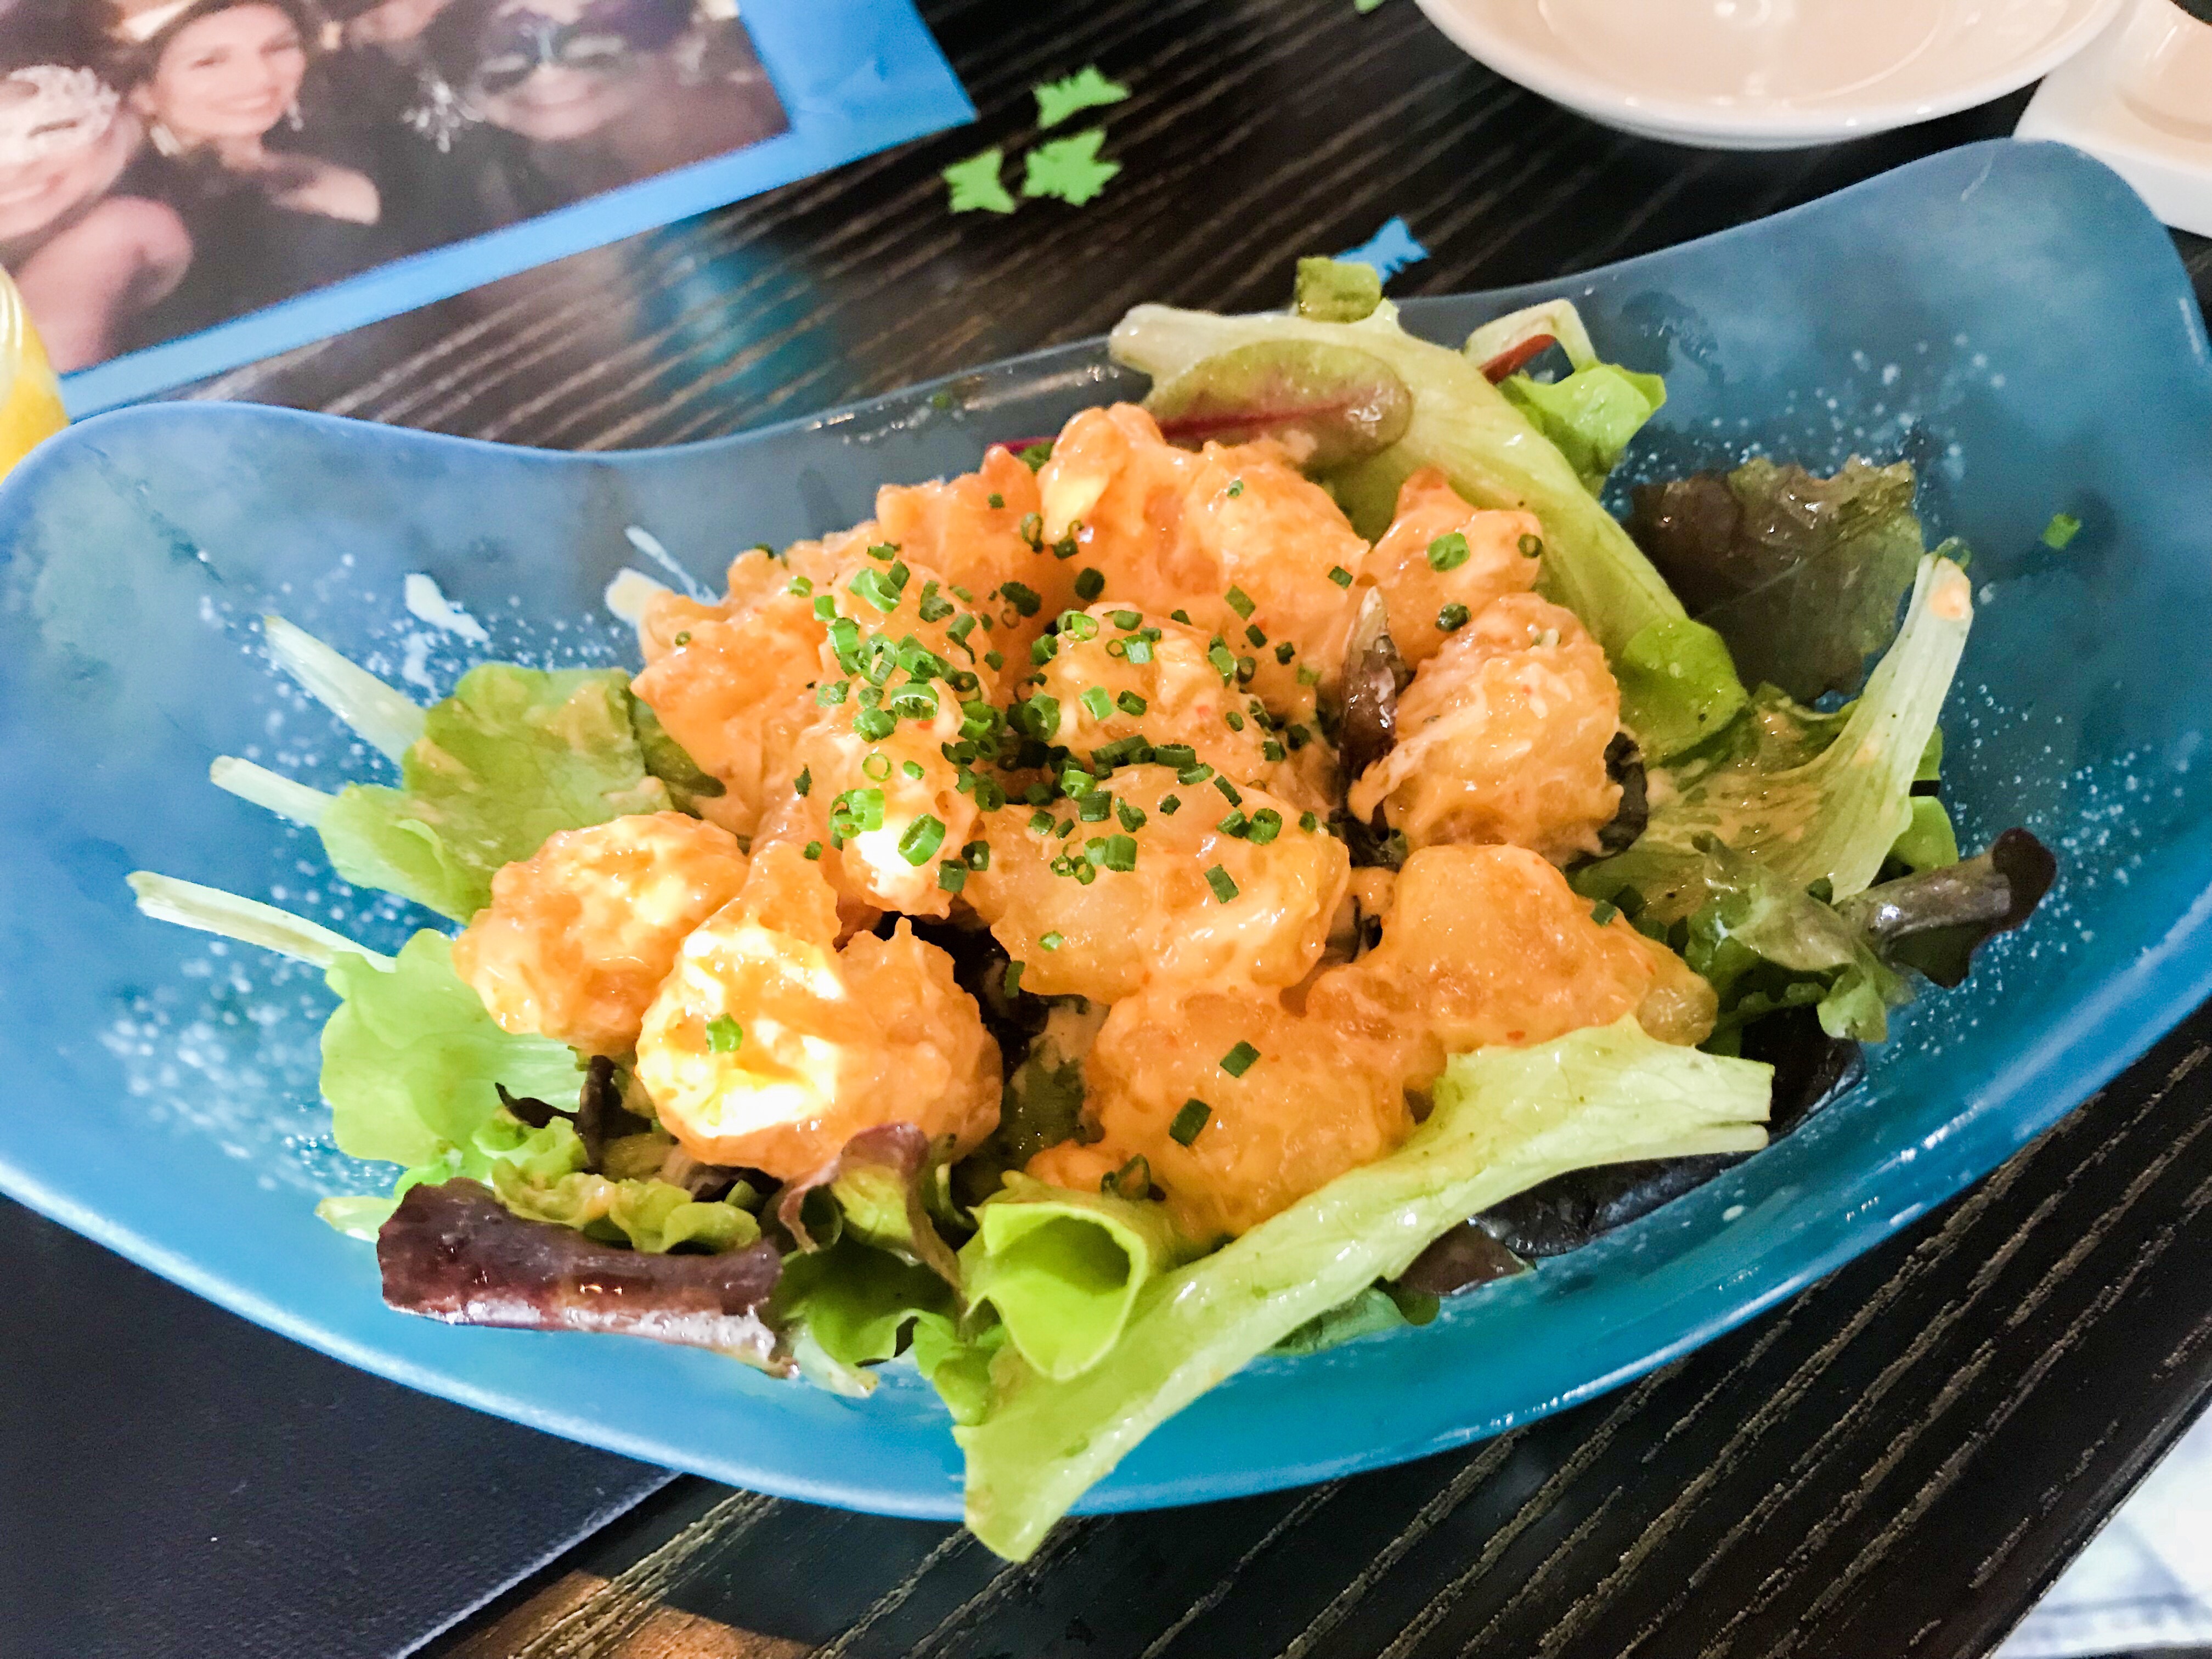 Rock shrimp salad - one of the best things on the menu